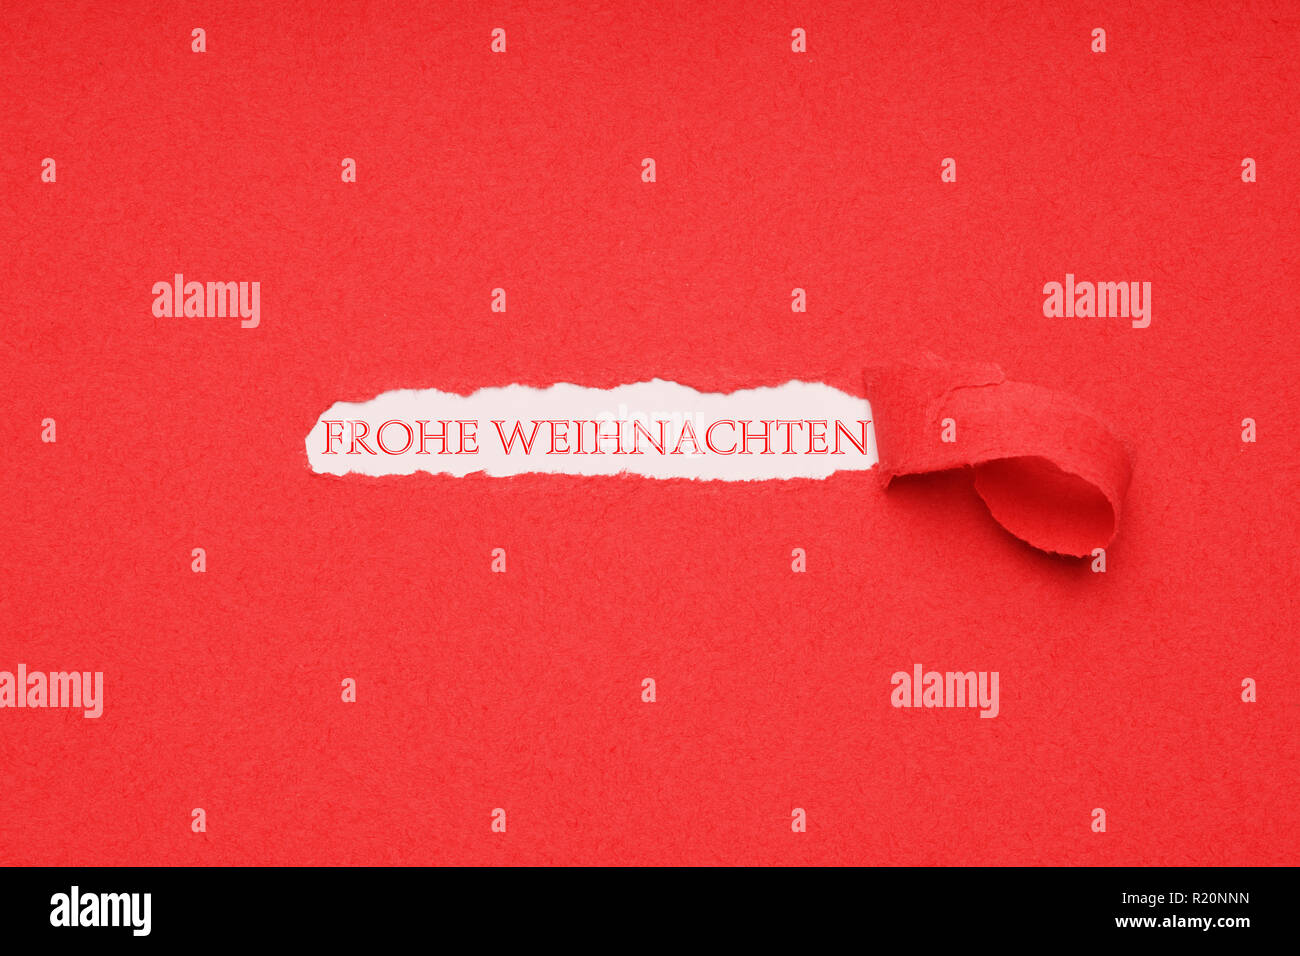 Frohe Weihnachten is German for merry christmas Stock Photo